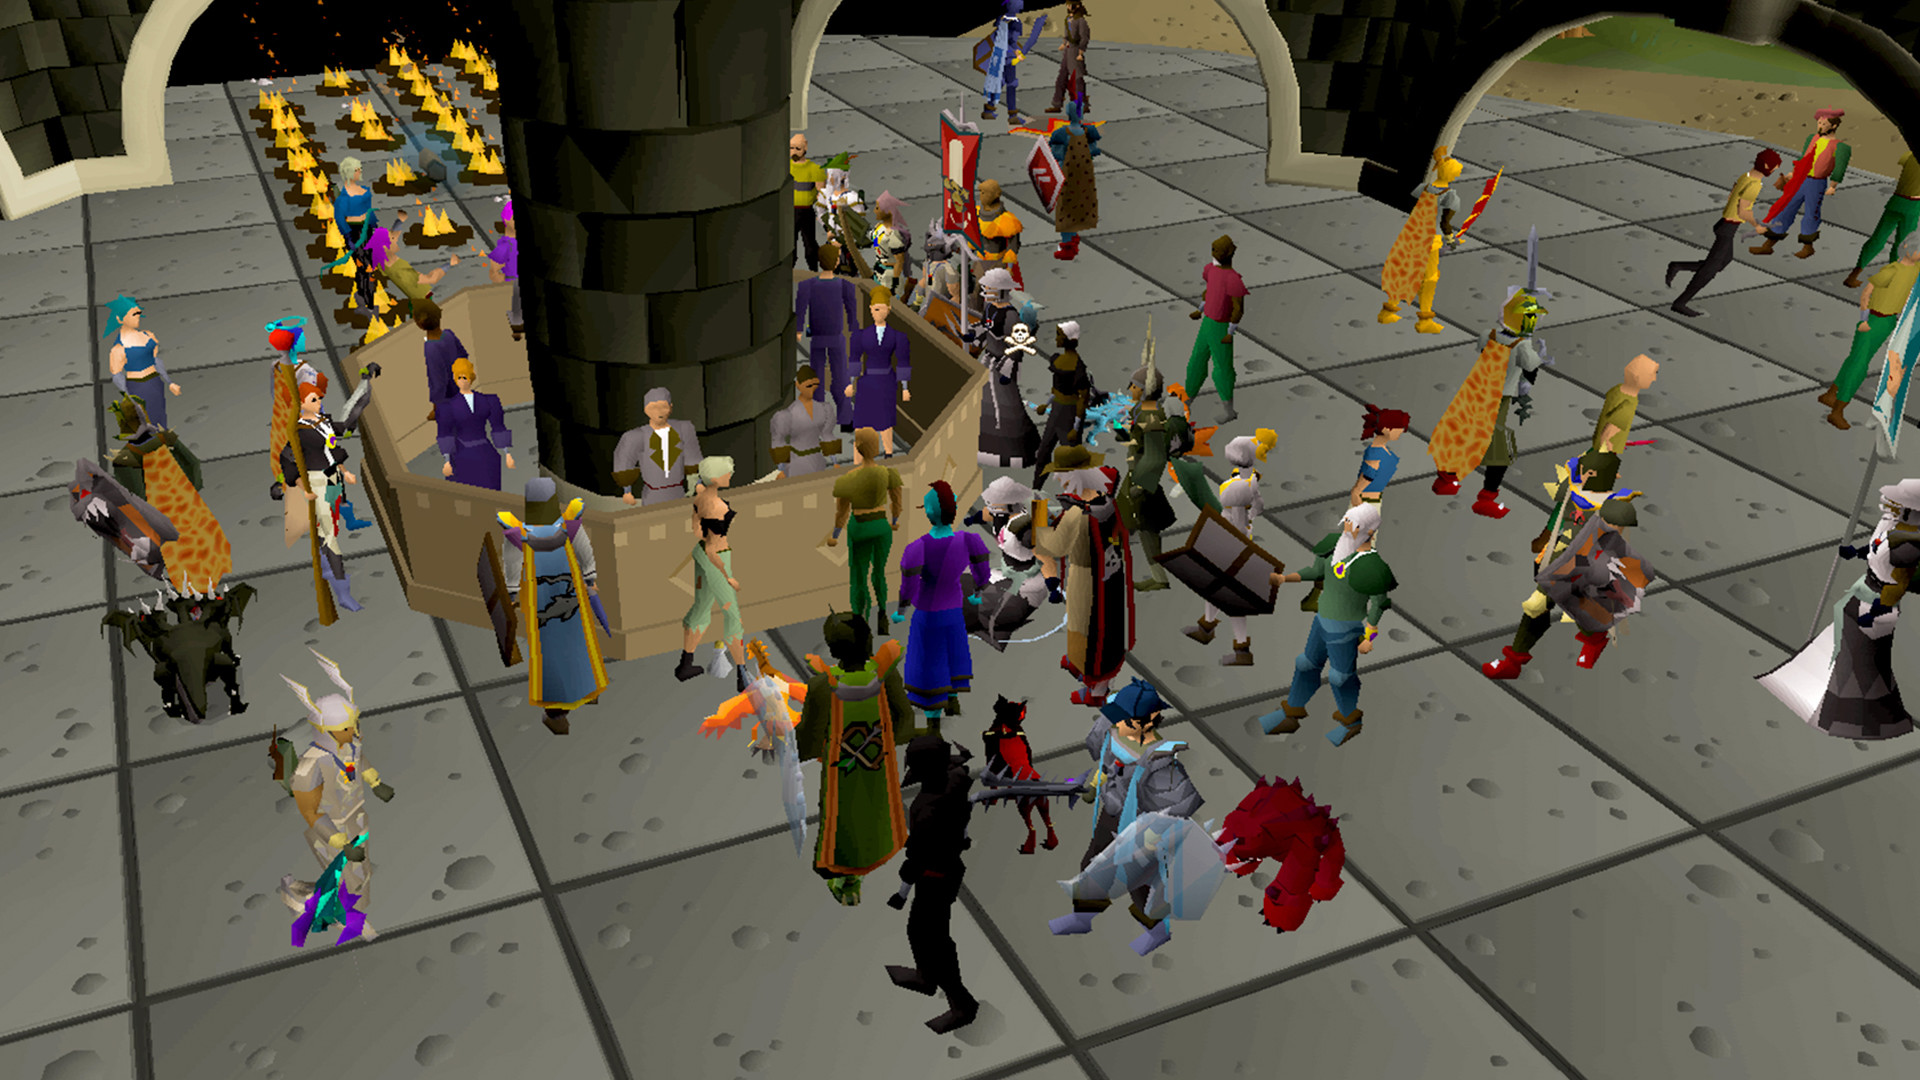 Different characters of Old School RuneScape in a game